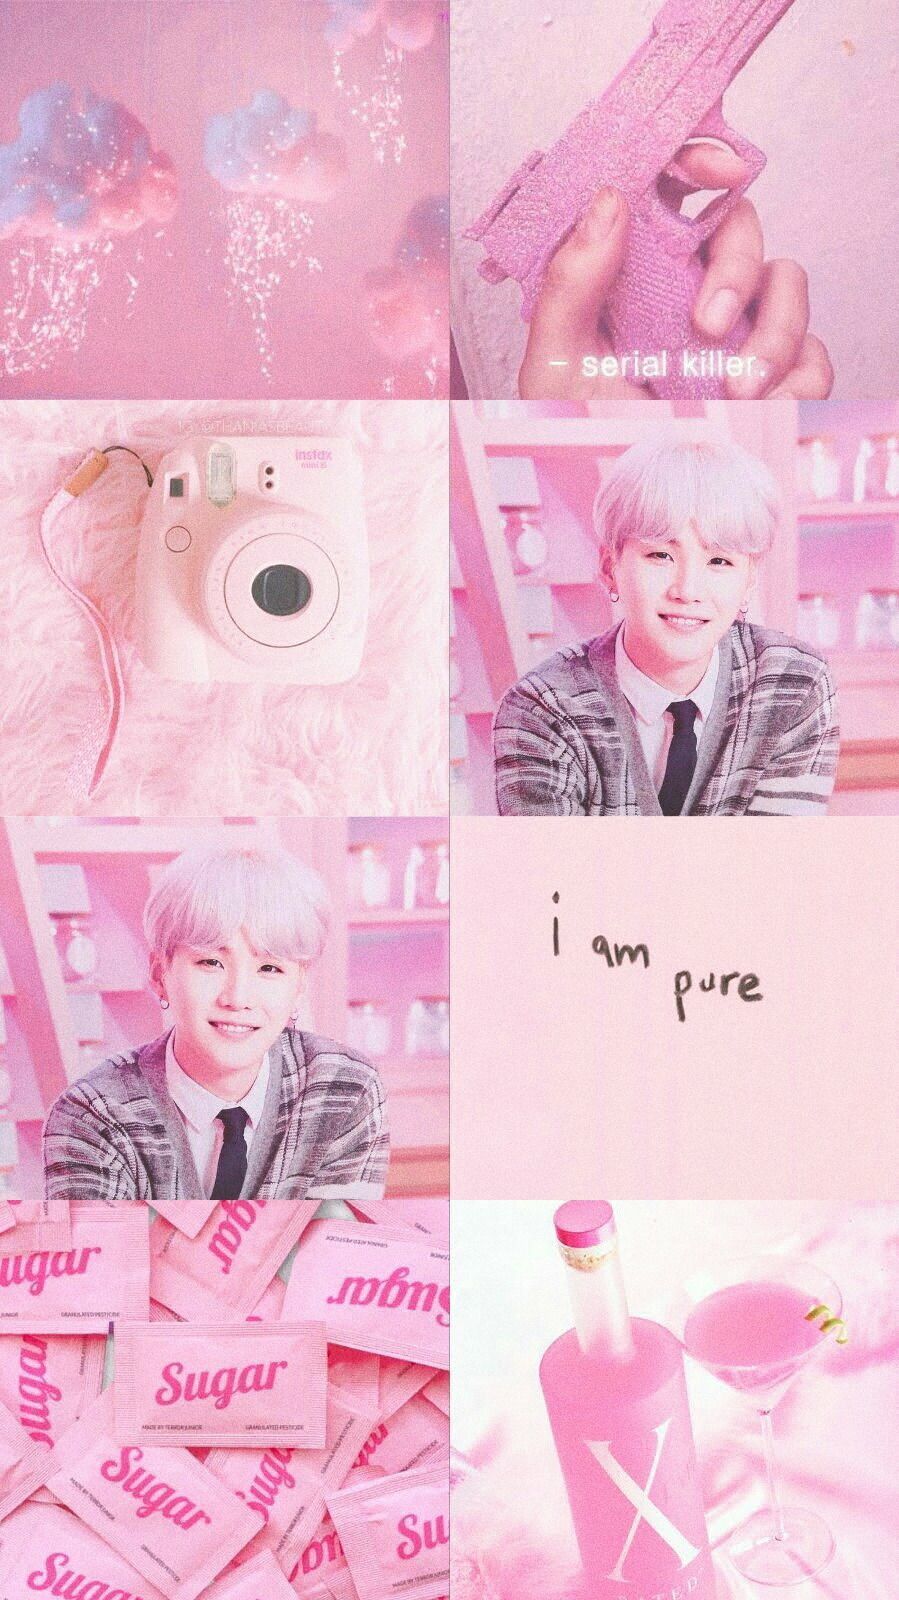 Aesthetic wallpaper of BTS's Jimin with a pink theme - Suga